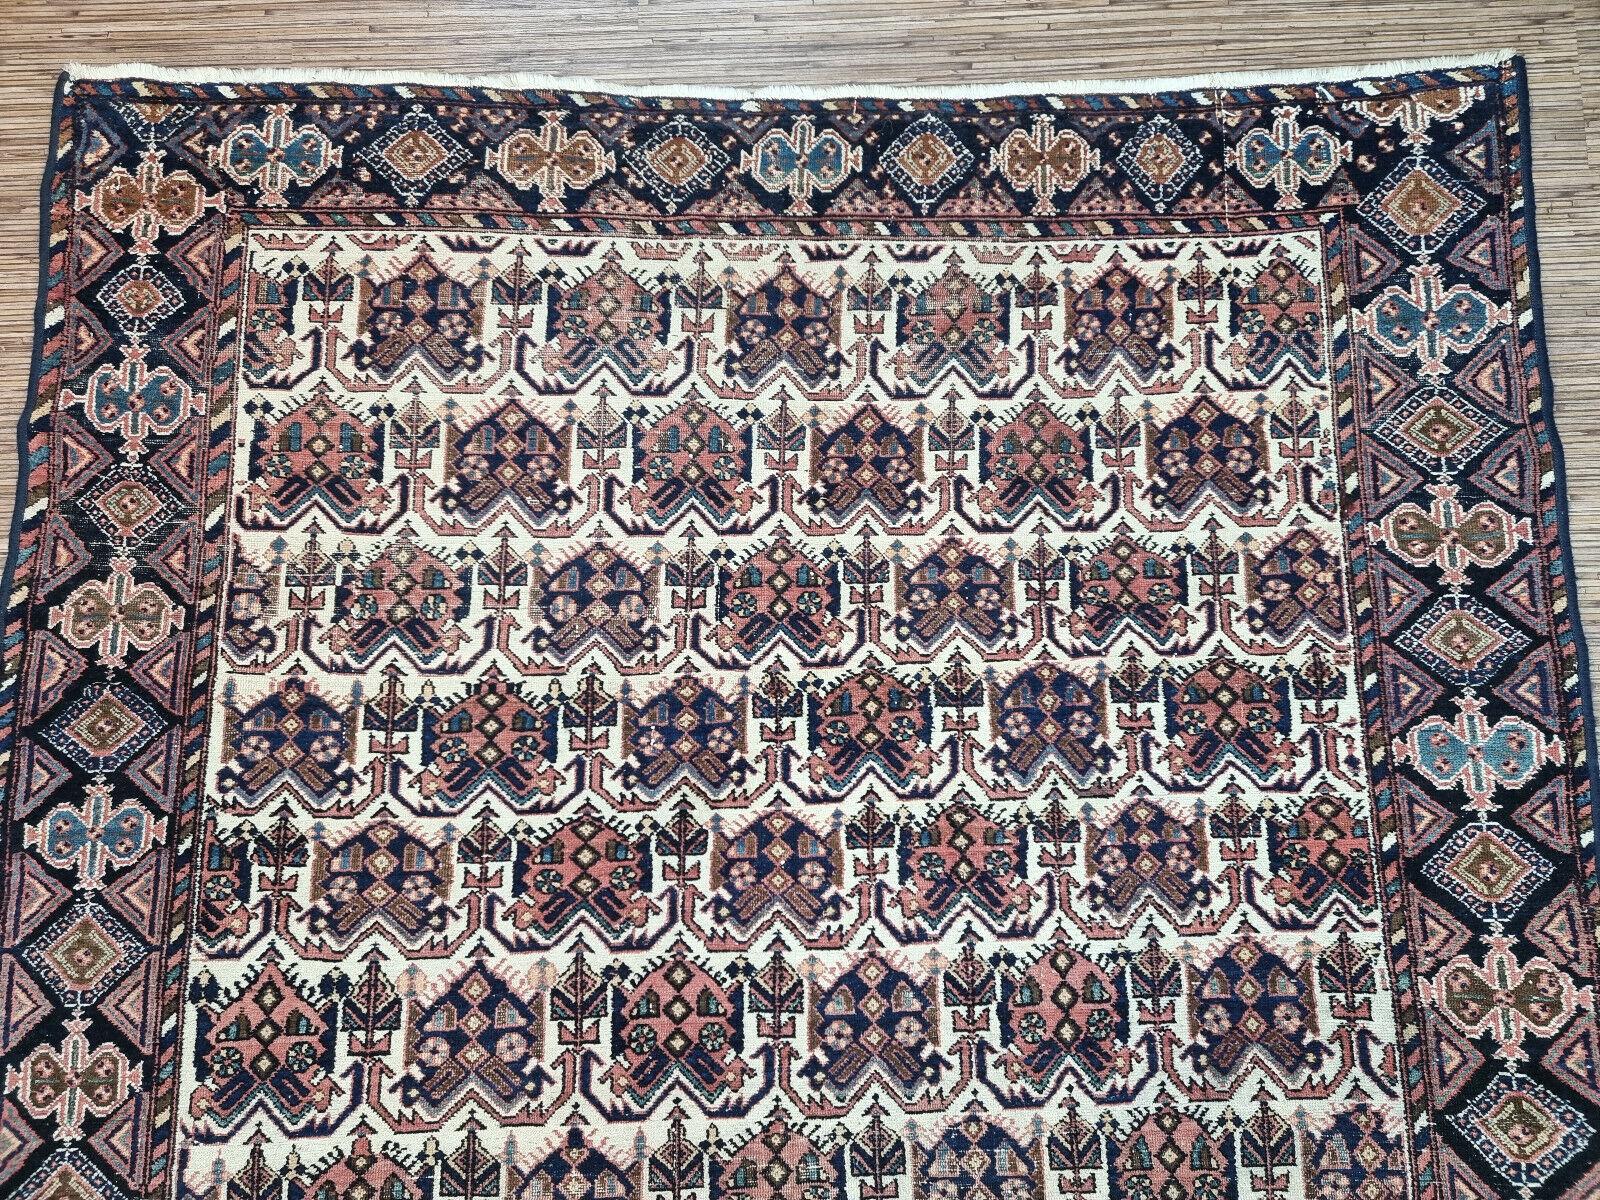 Early 20th Century Handmade Antique Persian Style Afshar Rug 5.3' x 6.9', 1920s - 1D96 For Sale